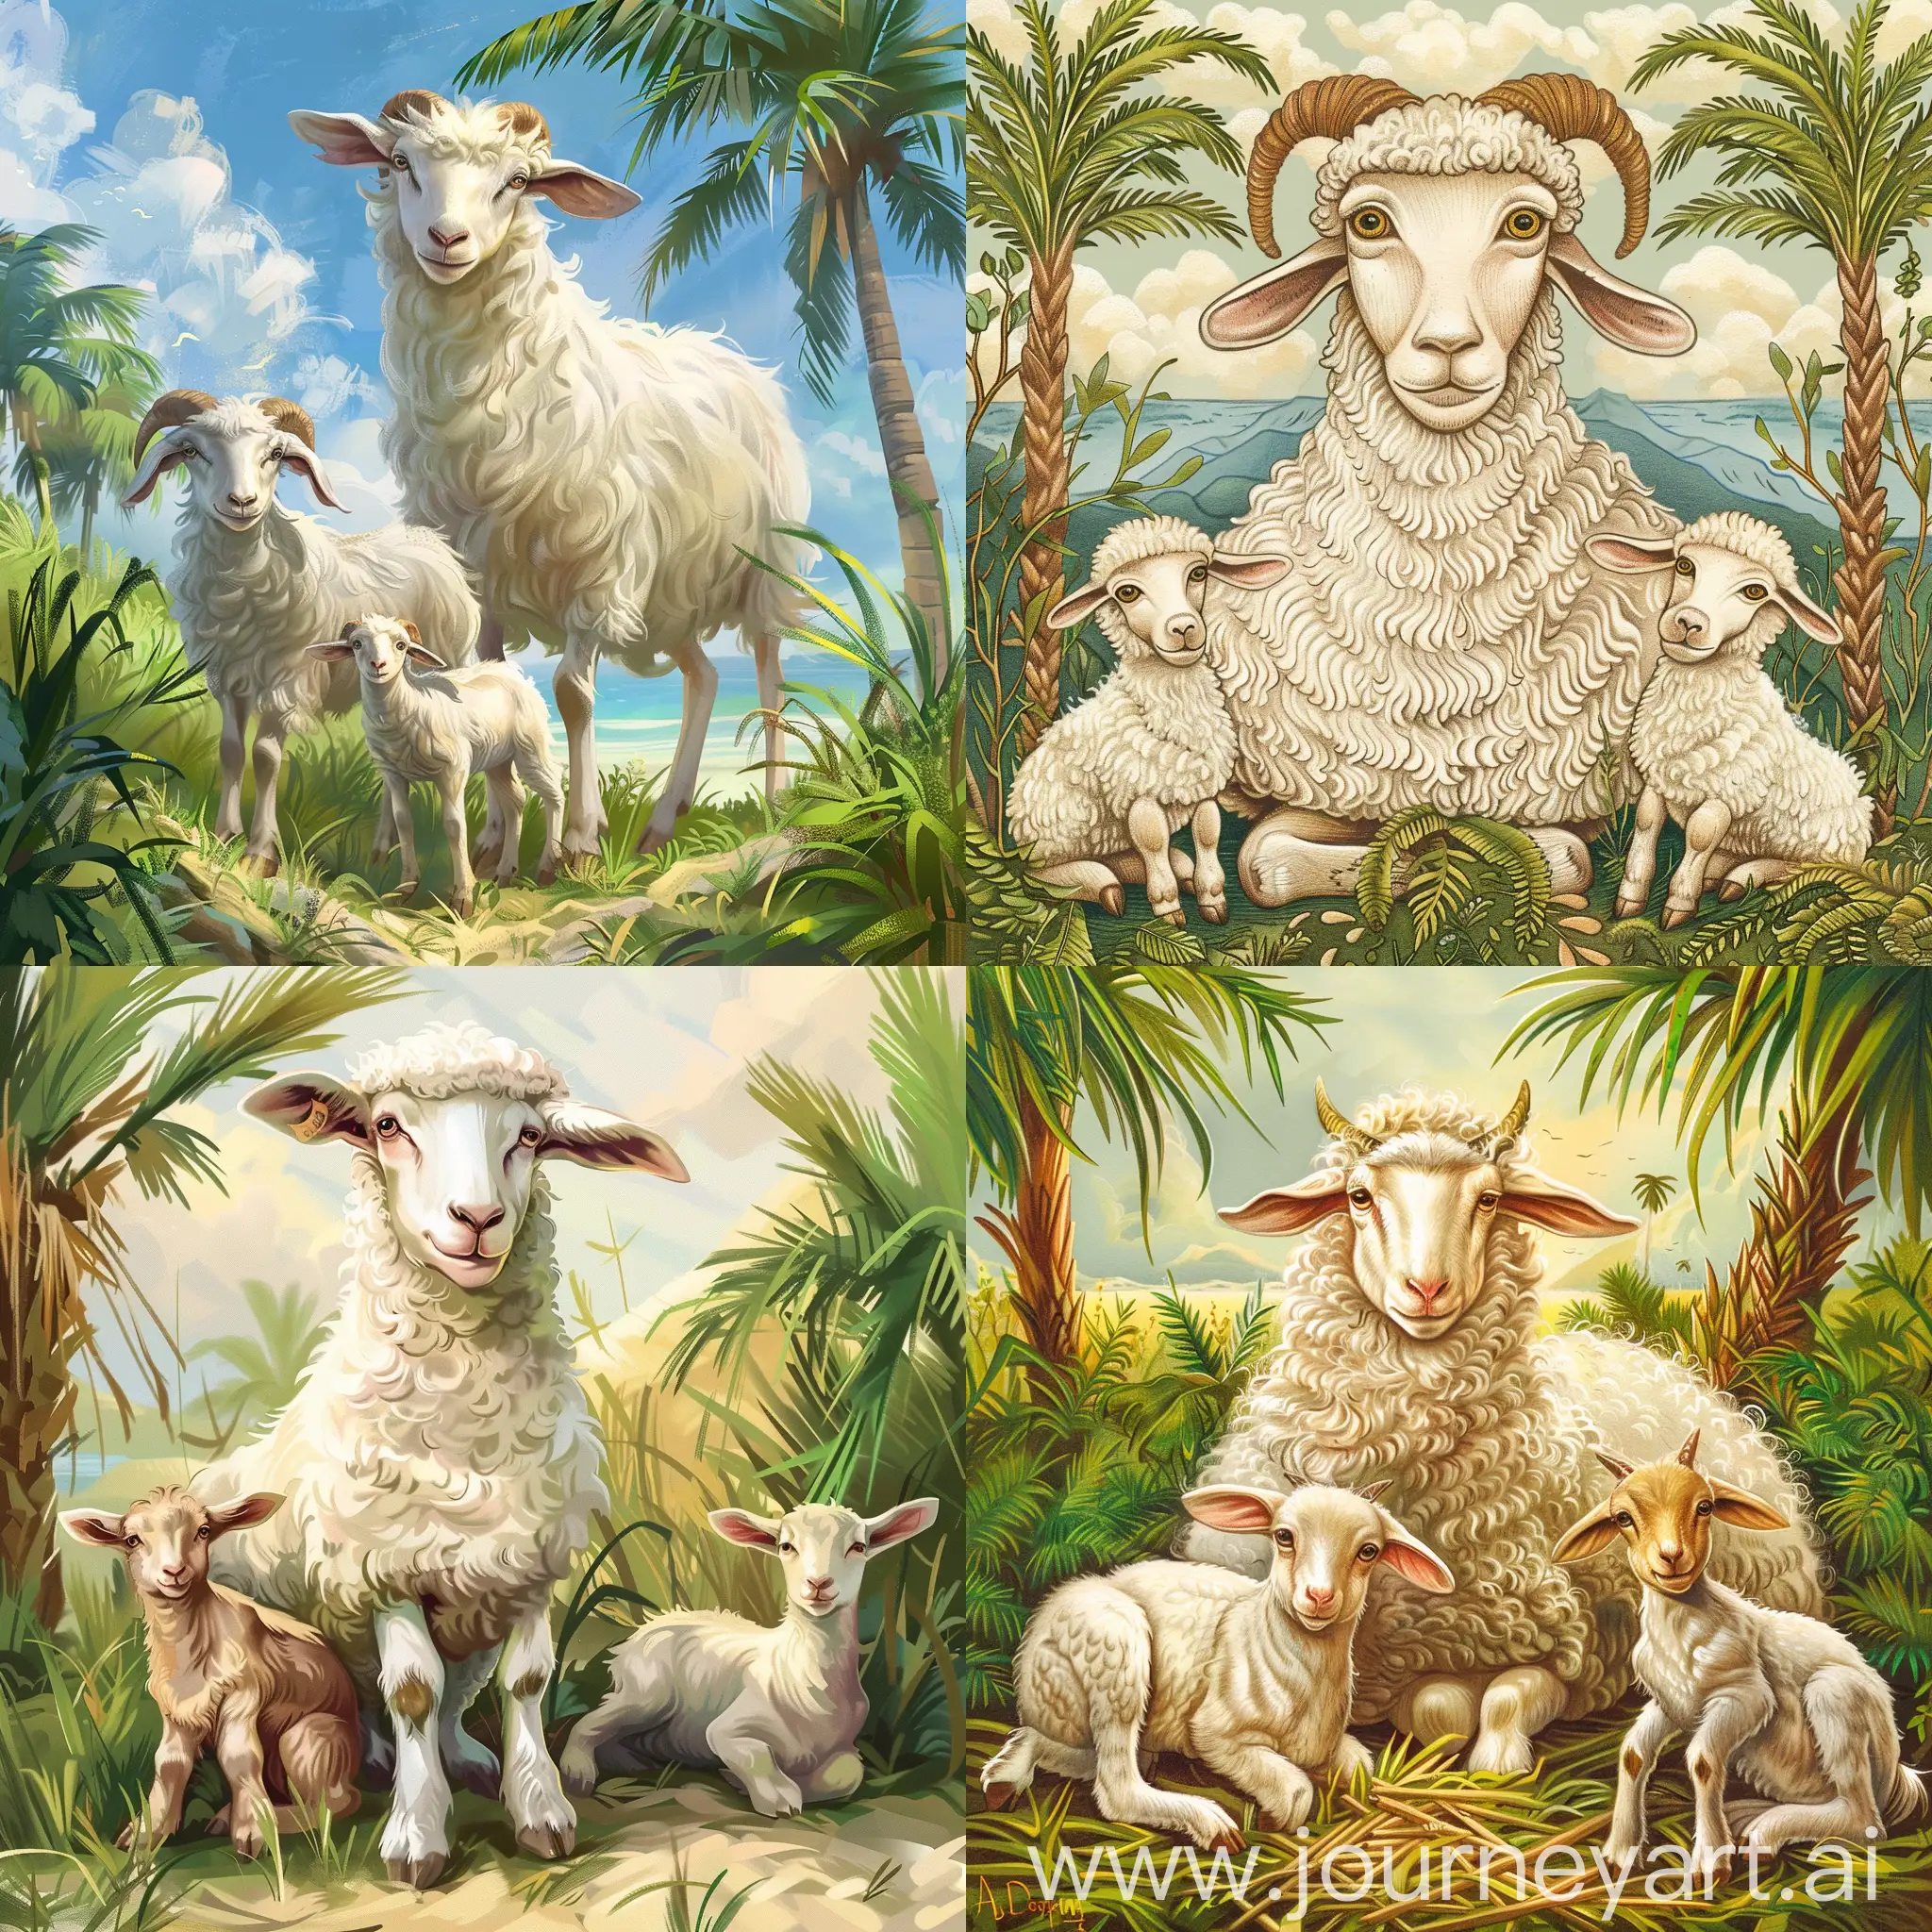 Whimsical-White-Mother-Sheep-and-Two-Goats-in-Nature-Scene